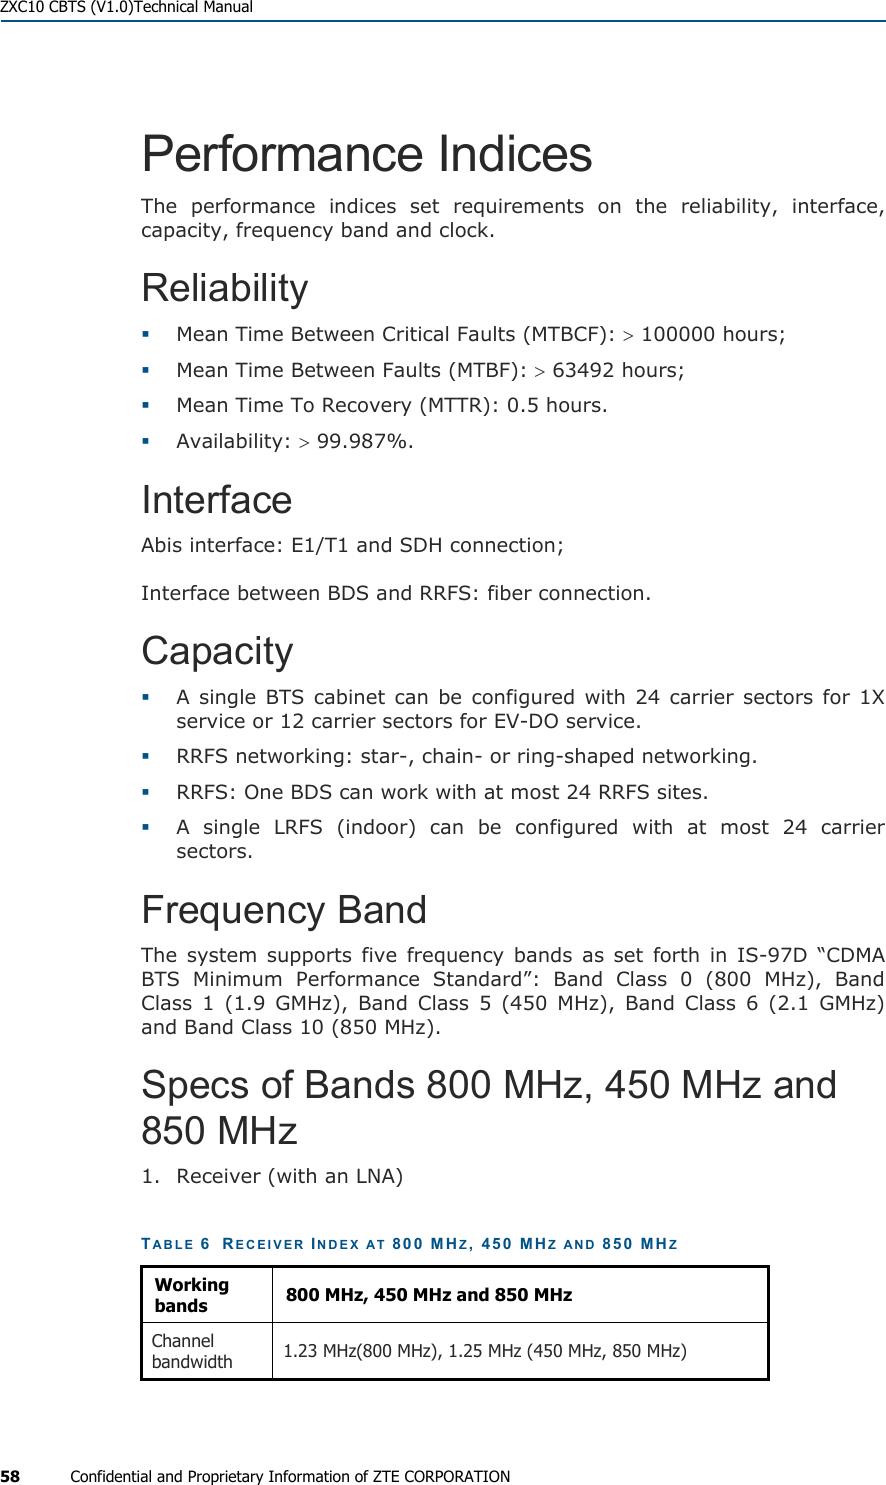  ZXC10 CBTS (V1.0)Technical Manual 58  Confidential and Proprietary Information of ZTE CORPORATION Performance Indices  The performance indices set requirements on the reliability, interface, capacity, frequency band and clock. Reliability   Mean Time Between Critical Faults (MTBCF): &gt; 100000 hours;    Mean Time Between Faults (MTBF): &gt; 63492 hours;   Mean Time To Recovery (MTTR): 0.5 hours.   Availability: &gt; 99.987%. Interface Abis interface: E1/T1 and SDH connection; Interface between BDS and RRFS: fiber connection. Capacity   A single BTS cabinet can be configured with 24 carrier sectors for 1X service or 12 carrier sectors for EV-DO service.    RRFS networking: star-, chain- or ring-shaped networking.    RRFS: One BDS can work with at most 24 RRFS sites.    A single LRFS (indoor) can be configured with at most 24 carrier sectors.  Frequency Band The system supports five frequency bands as set forth in IS-97D “CDMA BTS Minimum Performance Standard”: Band Class 0 (800 MHz), Band Class 1 (1.9 GMHz), Band Class 5 (450 MHz), Band Class 6 (2.1 GMHz) and Band Class 10 (850 MHz).  Specs of Bands 800 MHz, 450 MHz and 850 MHz 1. Receiver (with an LNA) TABLE 6  RECEIVER INDEX AT 800 MHZ, 450 MHZ AND 850 MHZ Working bands  800 MHz, 450 MHz and 850 MHz Channel bandwidth  1.23 MHz(800 MHz), 1.25 MHz (450 MHz, 850 MHz) 